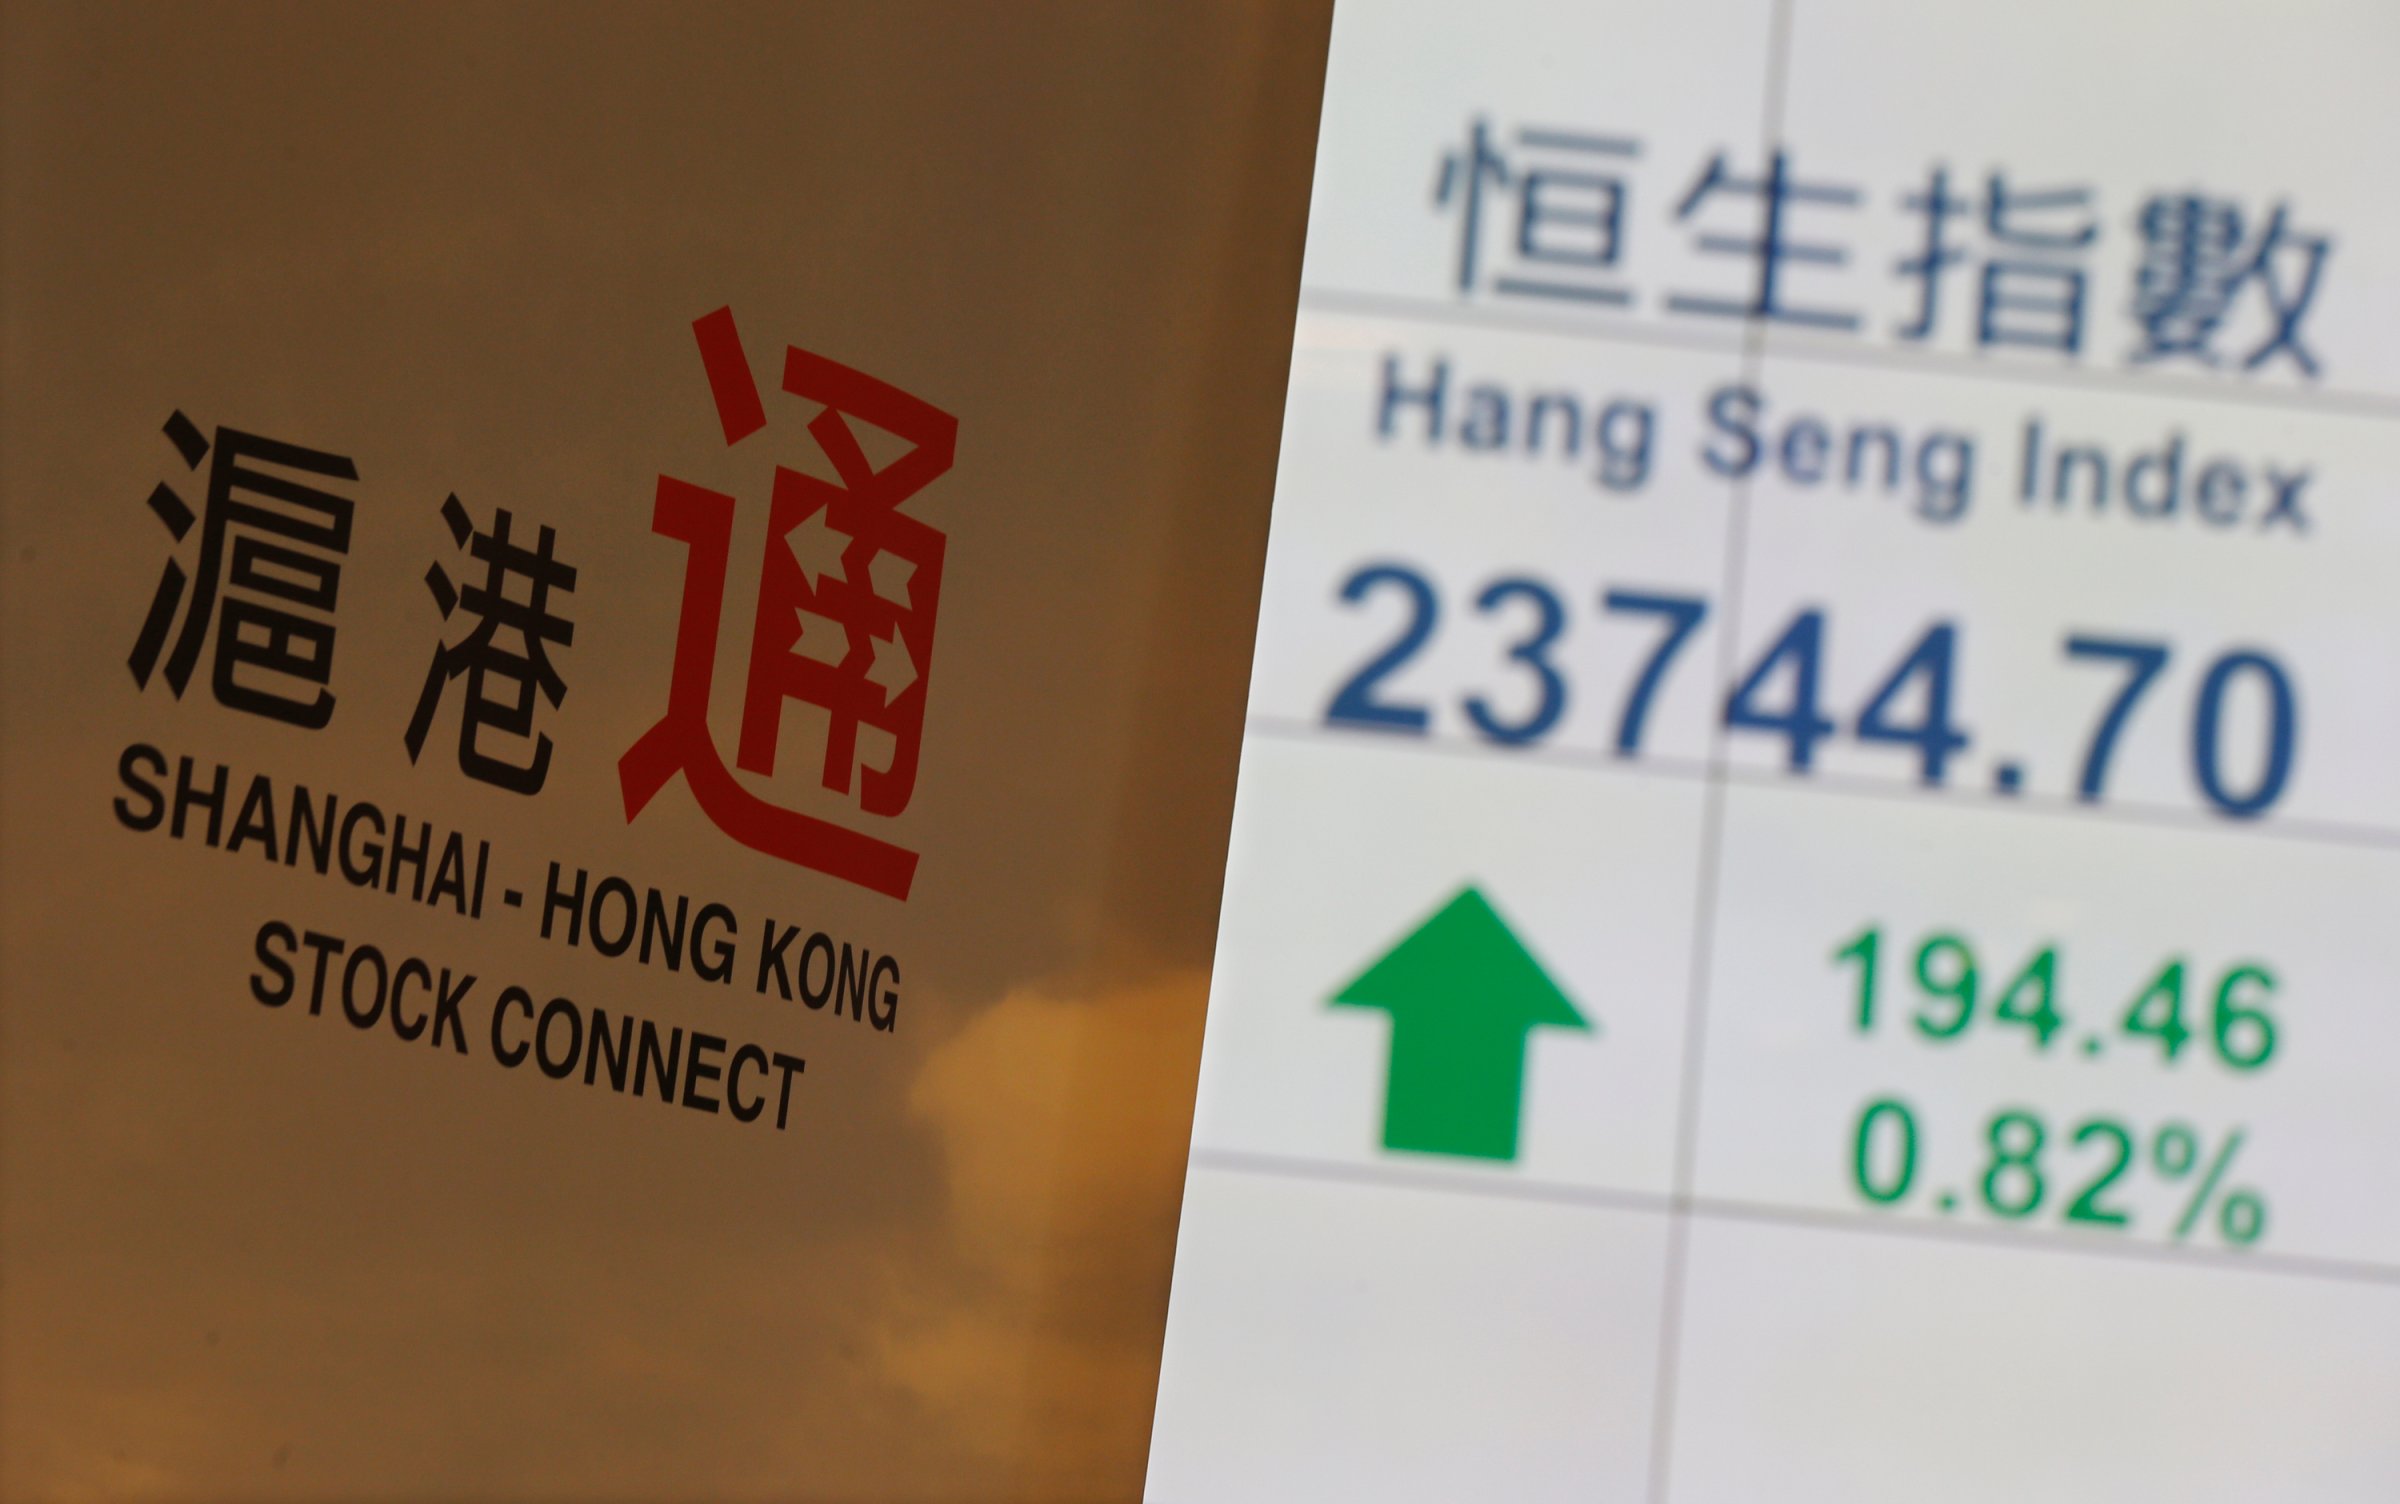 A banner introducing the Shanghai-Hong Kong Stock Connect is displayed in front of a panel showing the closing blue-chip Hang Seng Index at the Hong Kong Stock Exchange in Hong Kong